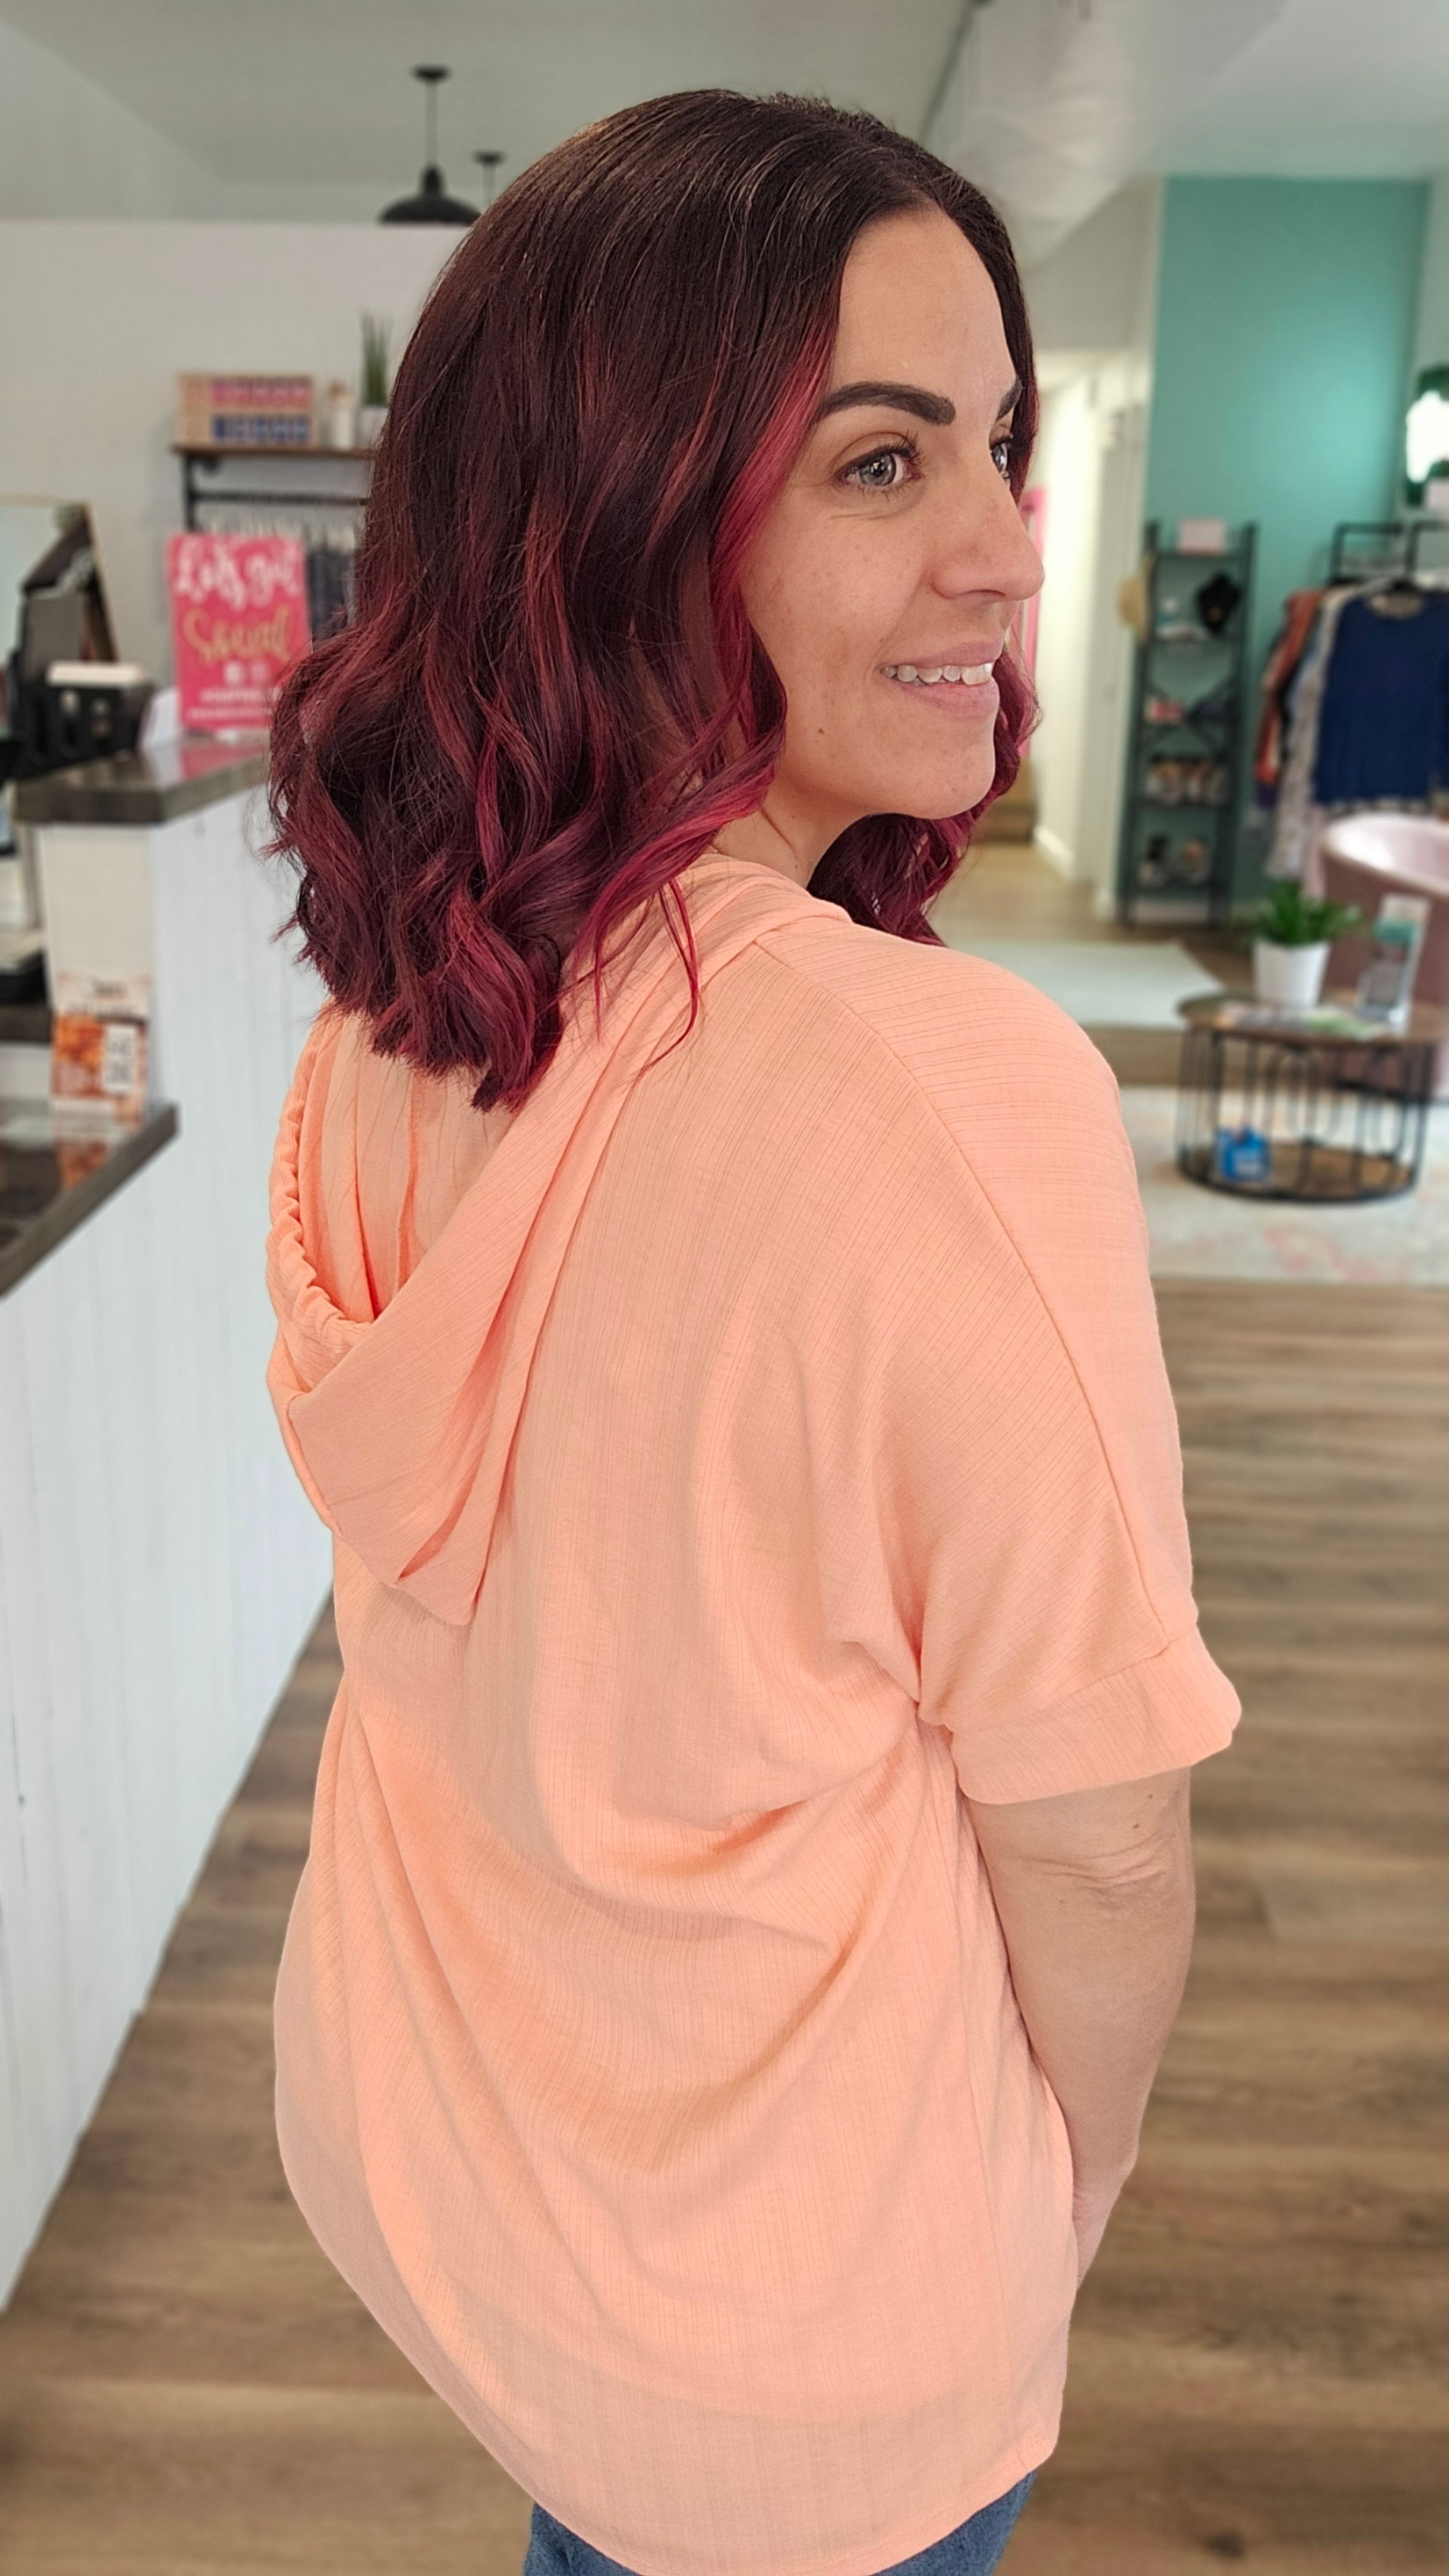 Shop Short Sleeve Hooded Tee - Coral-Shirts & Tops at Ruby Joy Boutique, a Women's Clothing Store in Pickerington, Ohio